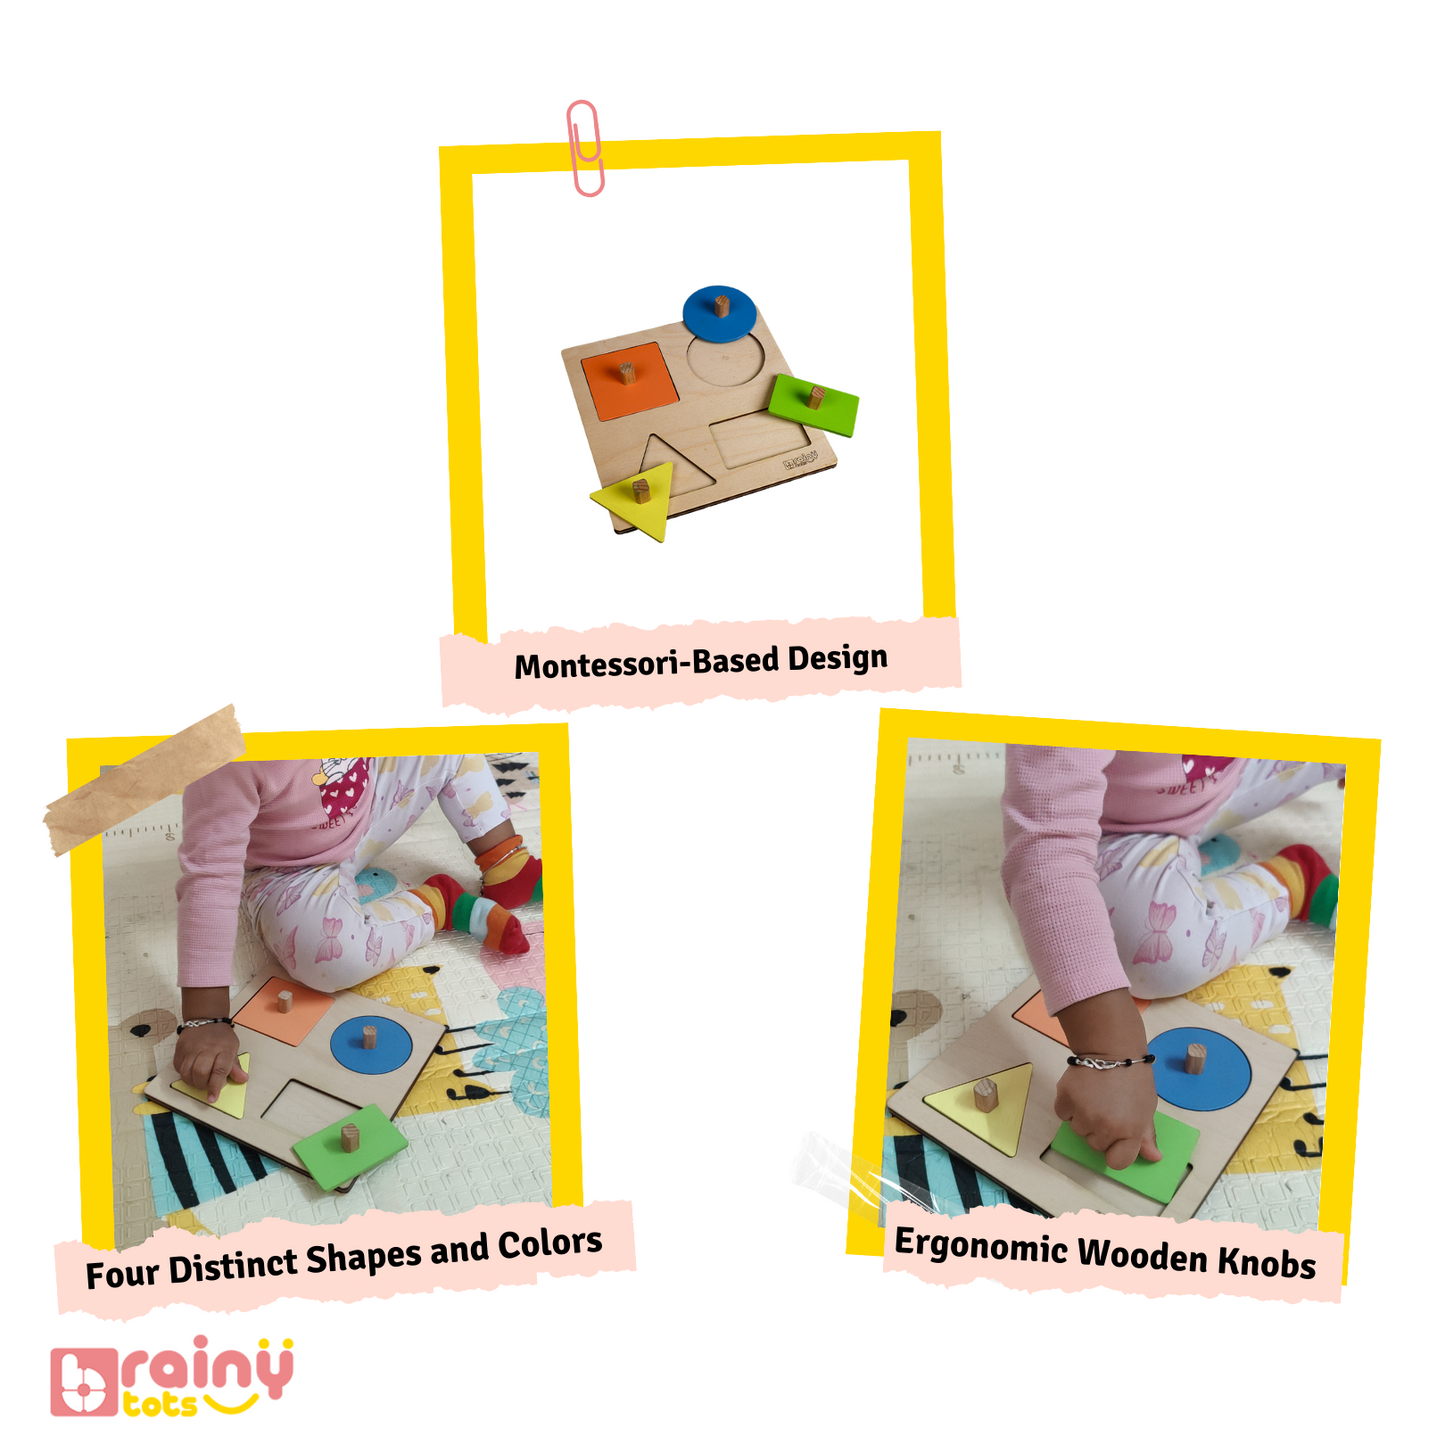 Features of our 4 Shapes Puzzle, designed for babies aged 8 months and up. This Montessori toy enhances problem-solving skills, shape recognition, and hand-eye coordination. Made from safe, durable materials, it includes various shapes for sorting and matching, promoting cognitive development and fine motor abilities. Perfect for early learning and interactive play.